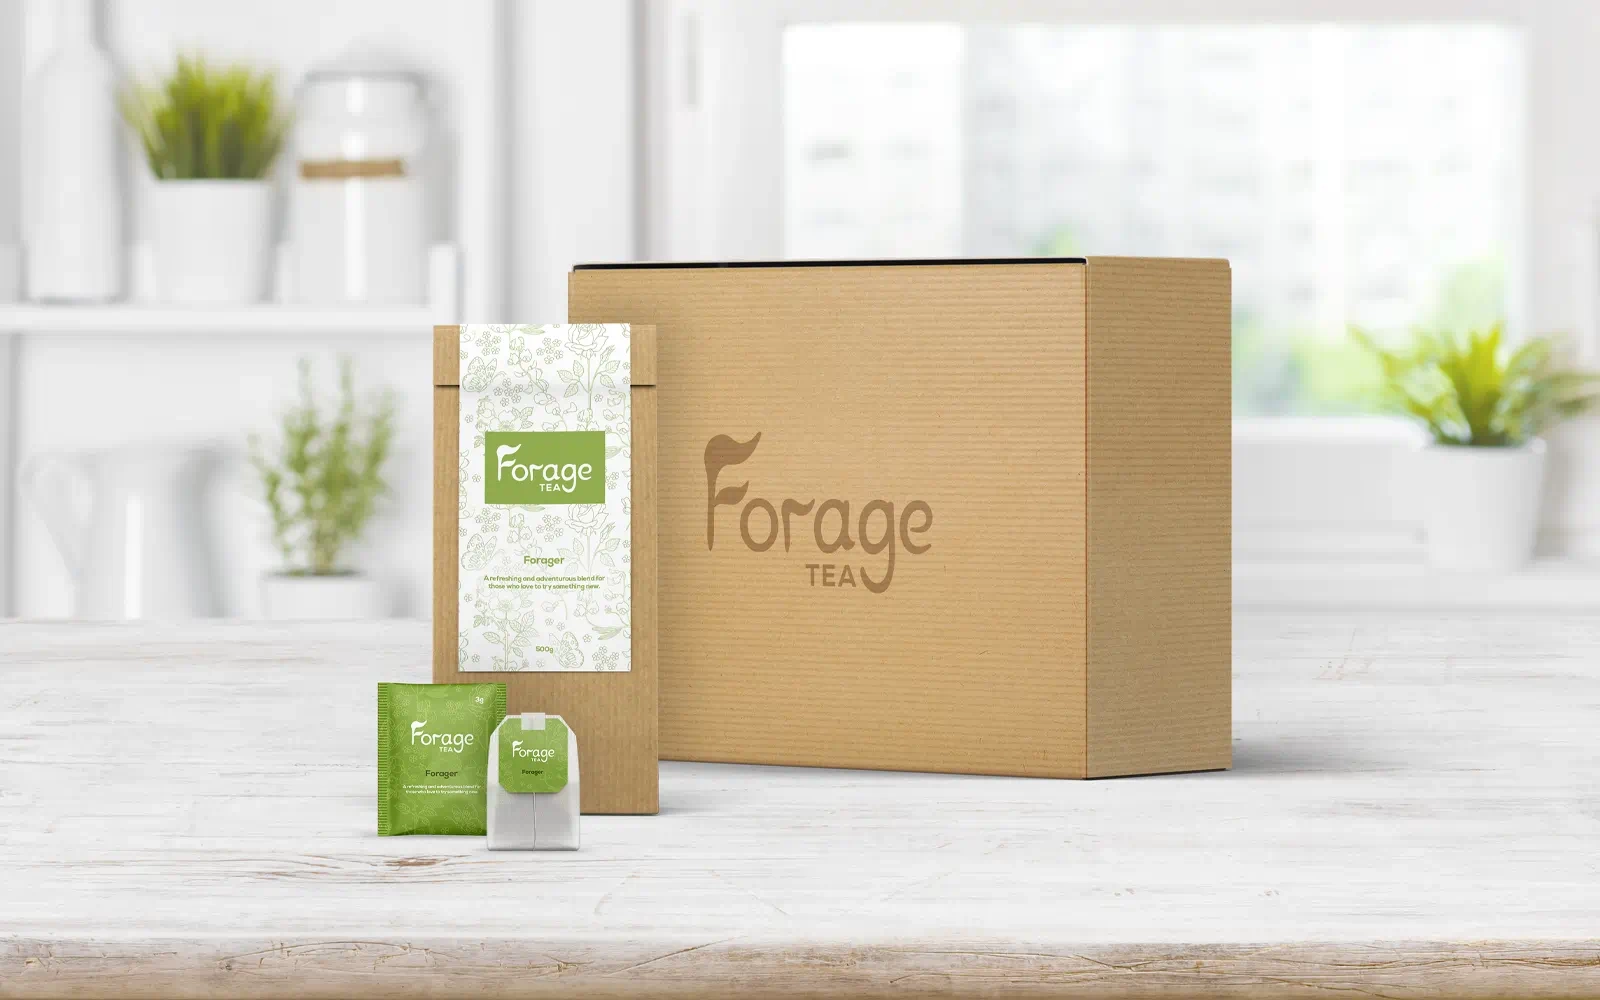 Packaging mockups with the Forage Tea branding including the outer box, inner packet, tea bag sachet and tea bag displayed in a well lit, white, modern kitchen